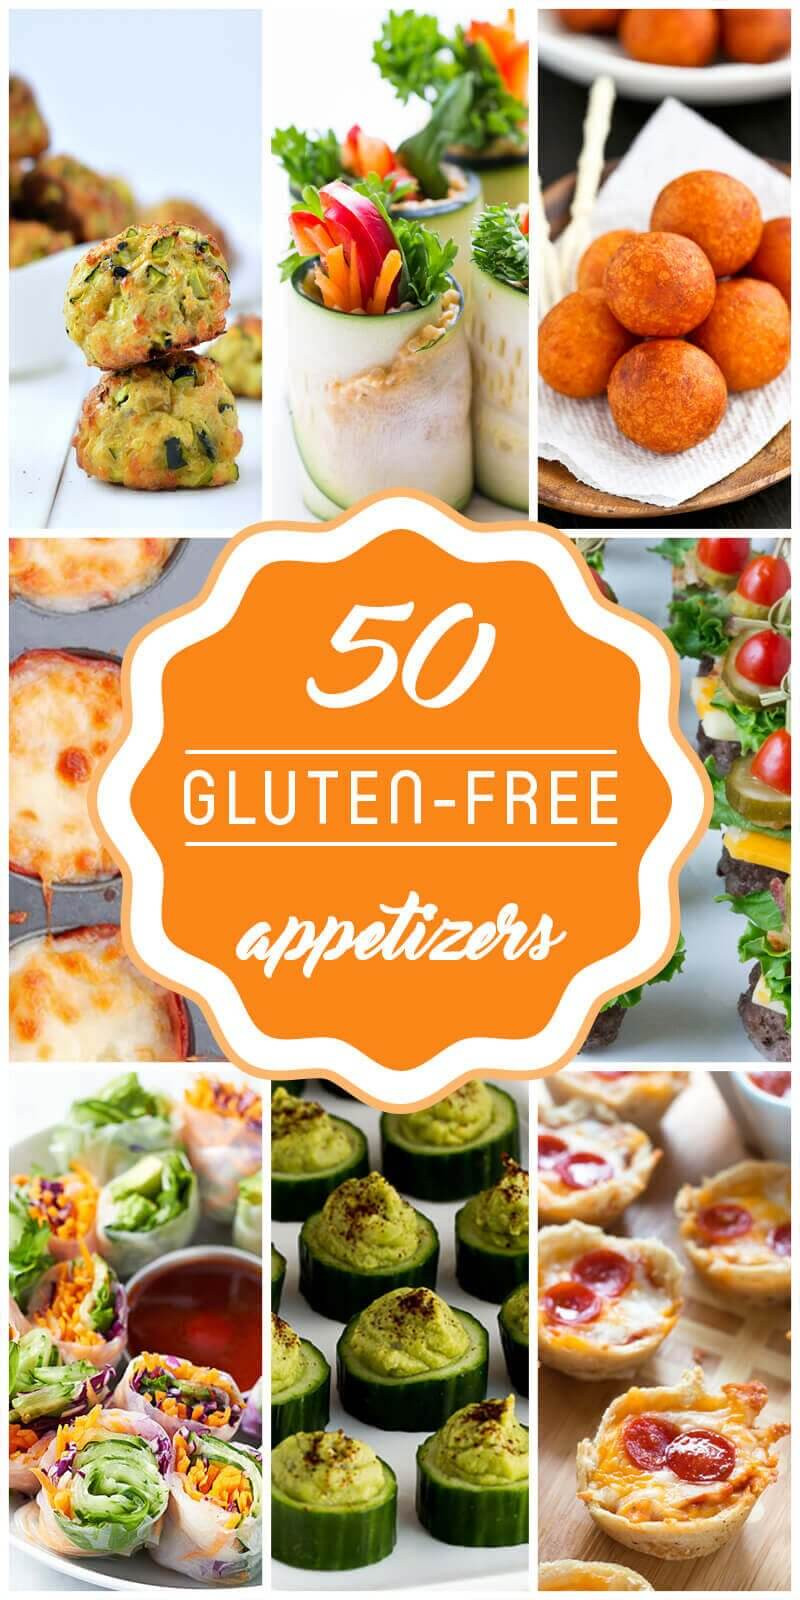 Gluten Free Dairy Free Appetizers
 50 Best Gluten Free Appetizer Recipes to Serve for Your